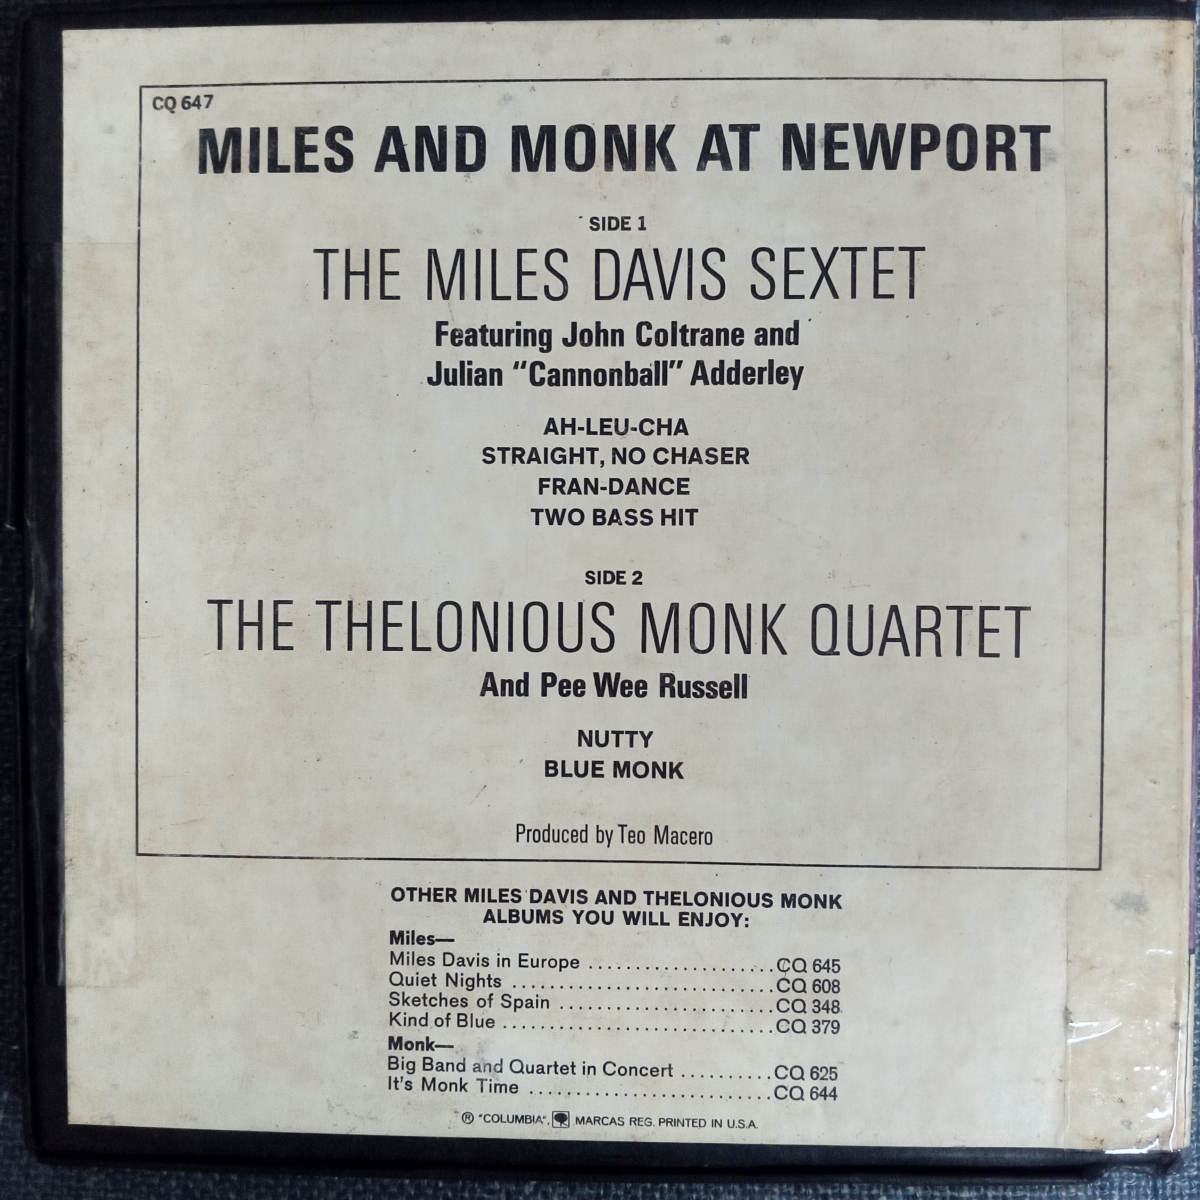  JAZZオープンリールテープ　MILES AND MONK AT NEWPORT　_画像3